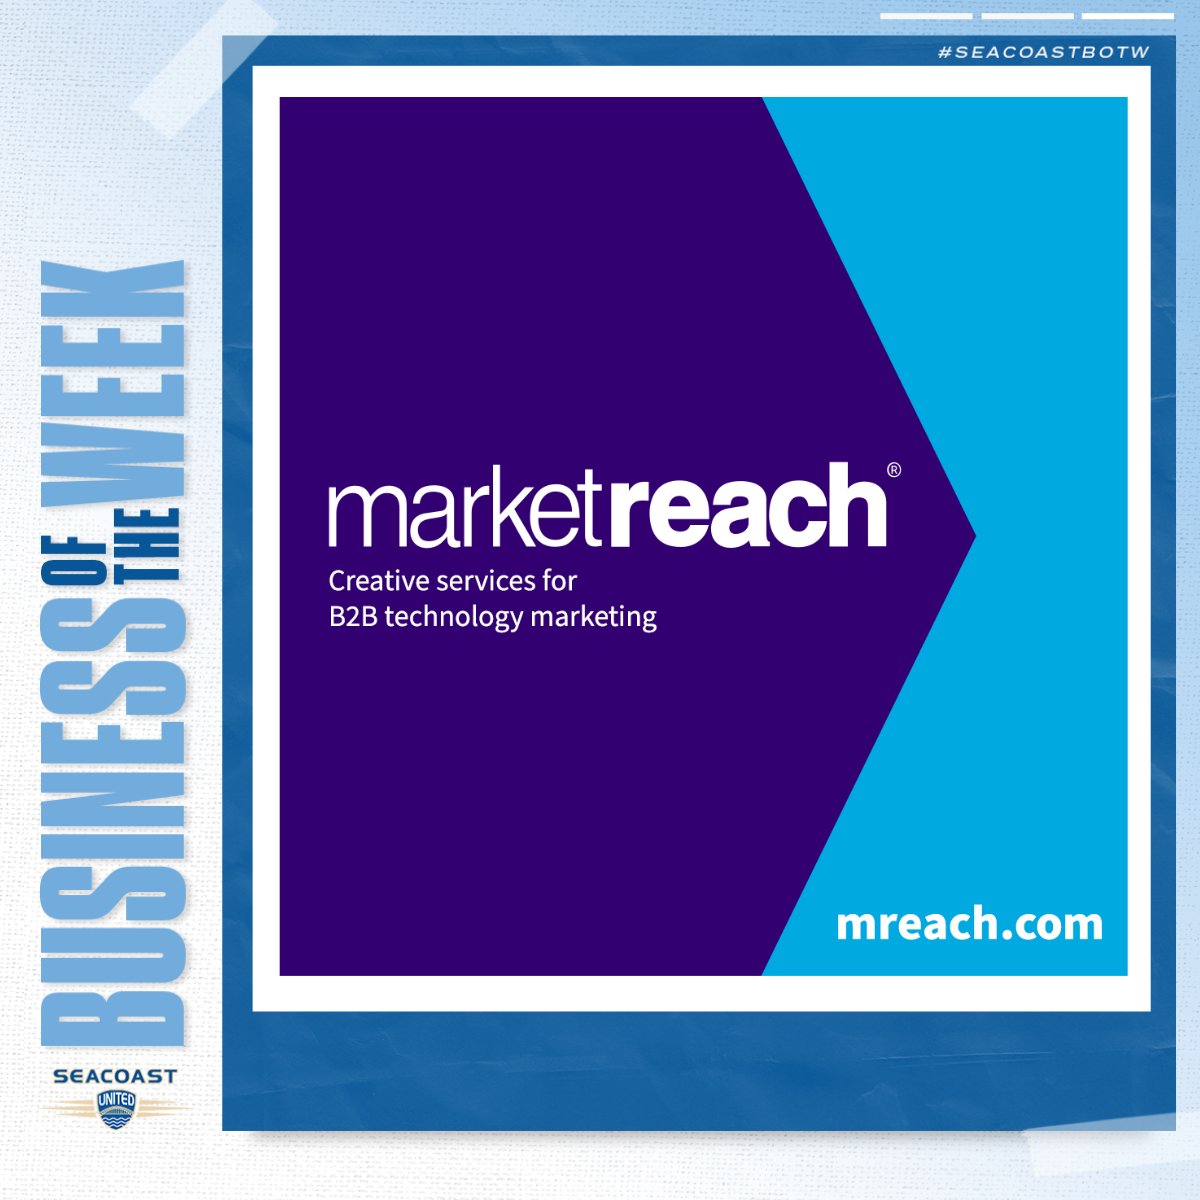 Headquartered in Nashua, @marketreach has been teaming up with leaders in B2B tech – putting expanded video, web, design, writing, strategic, event, and program-management capabilities within reach for local and global champions since 1994. Visit bit.ly/3qul33V